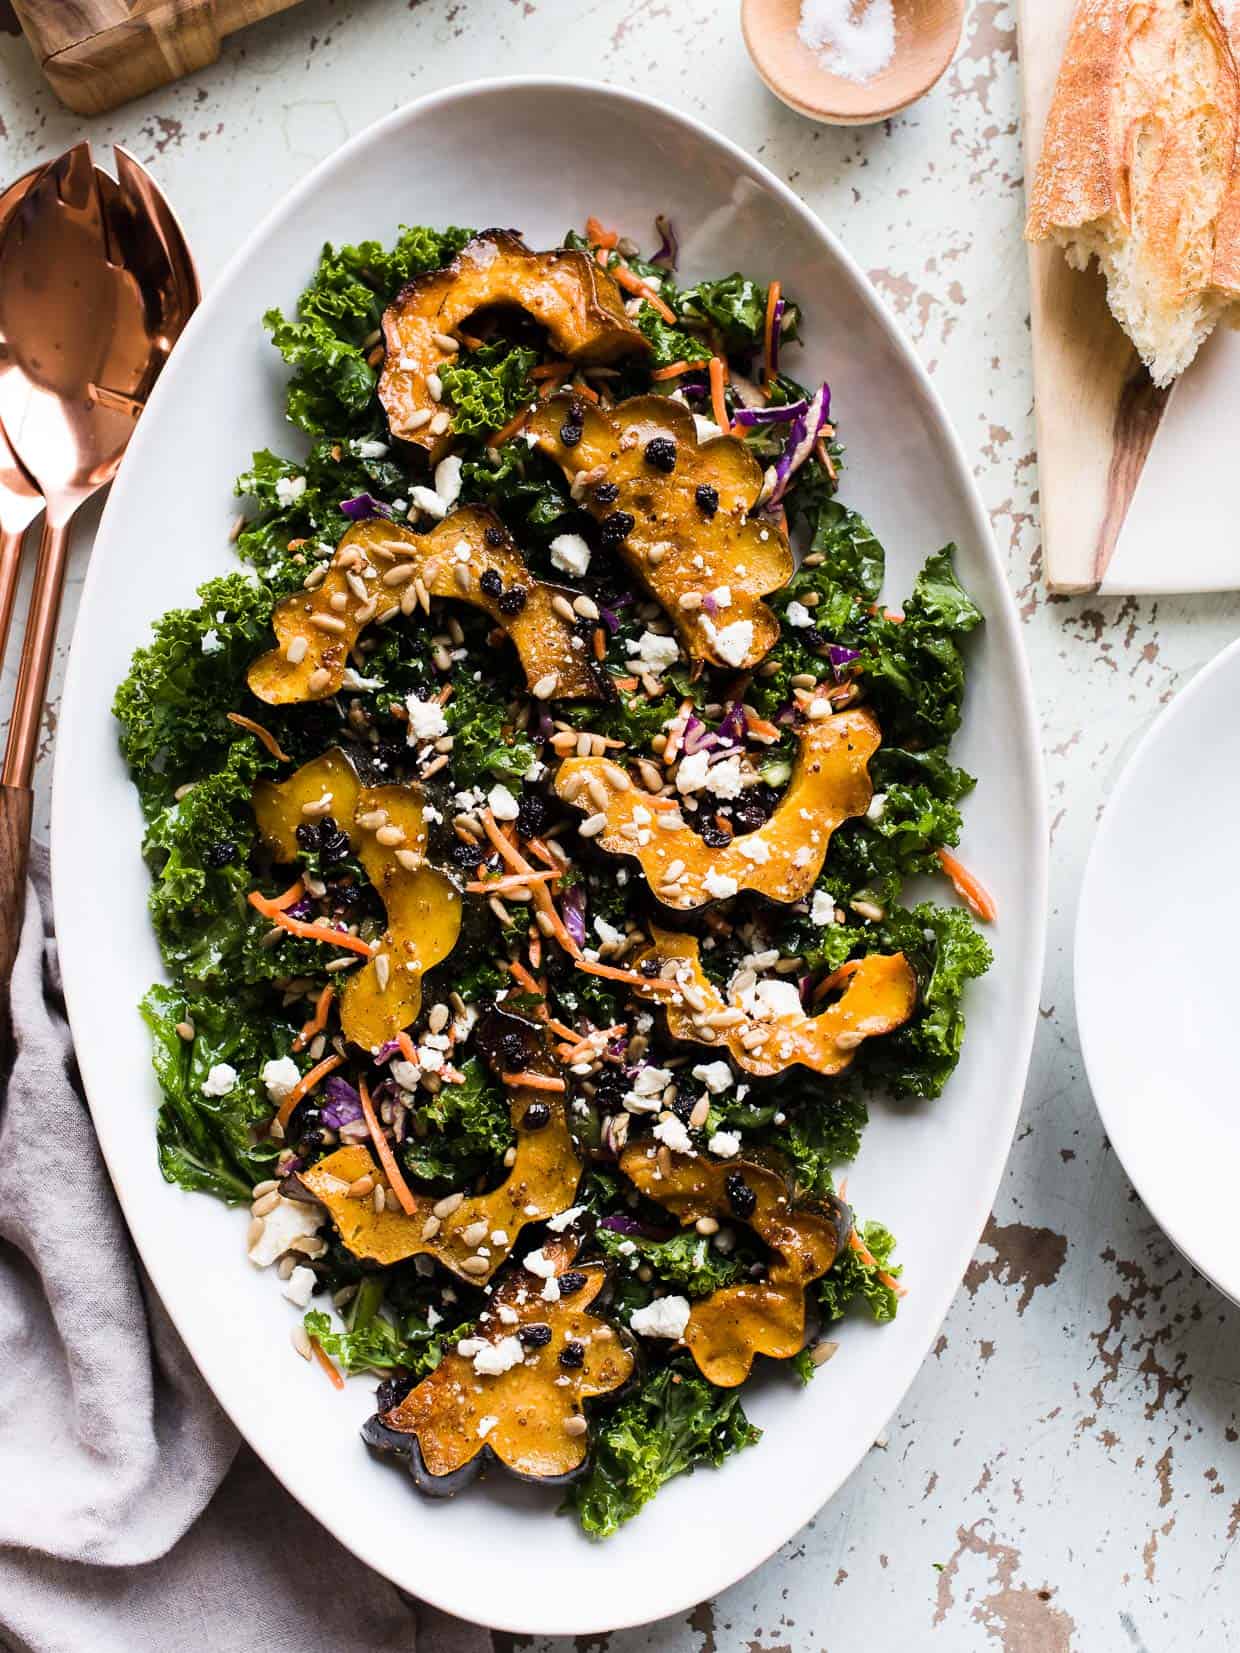 Roasted acorn squash over kale, with sunflower seeds, currants and a maple vinaigrette on a white serving platter.